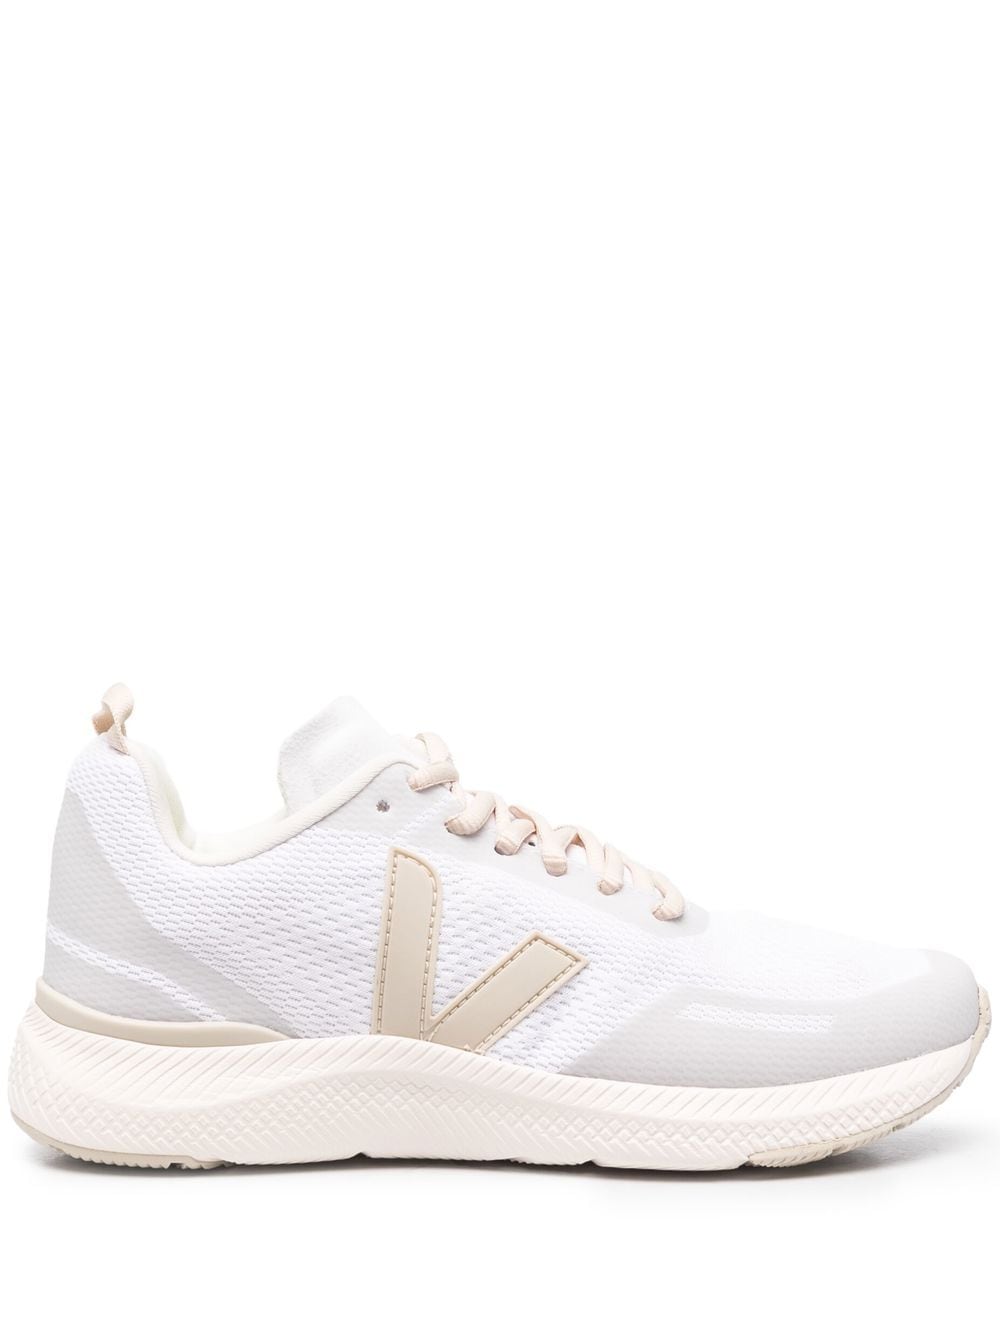 Image 1 of VEJA Impala low-top sneakers